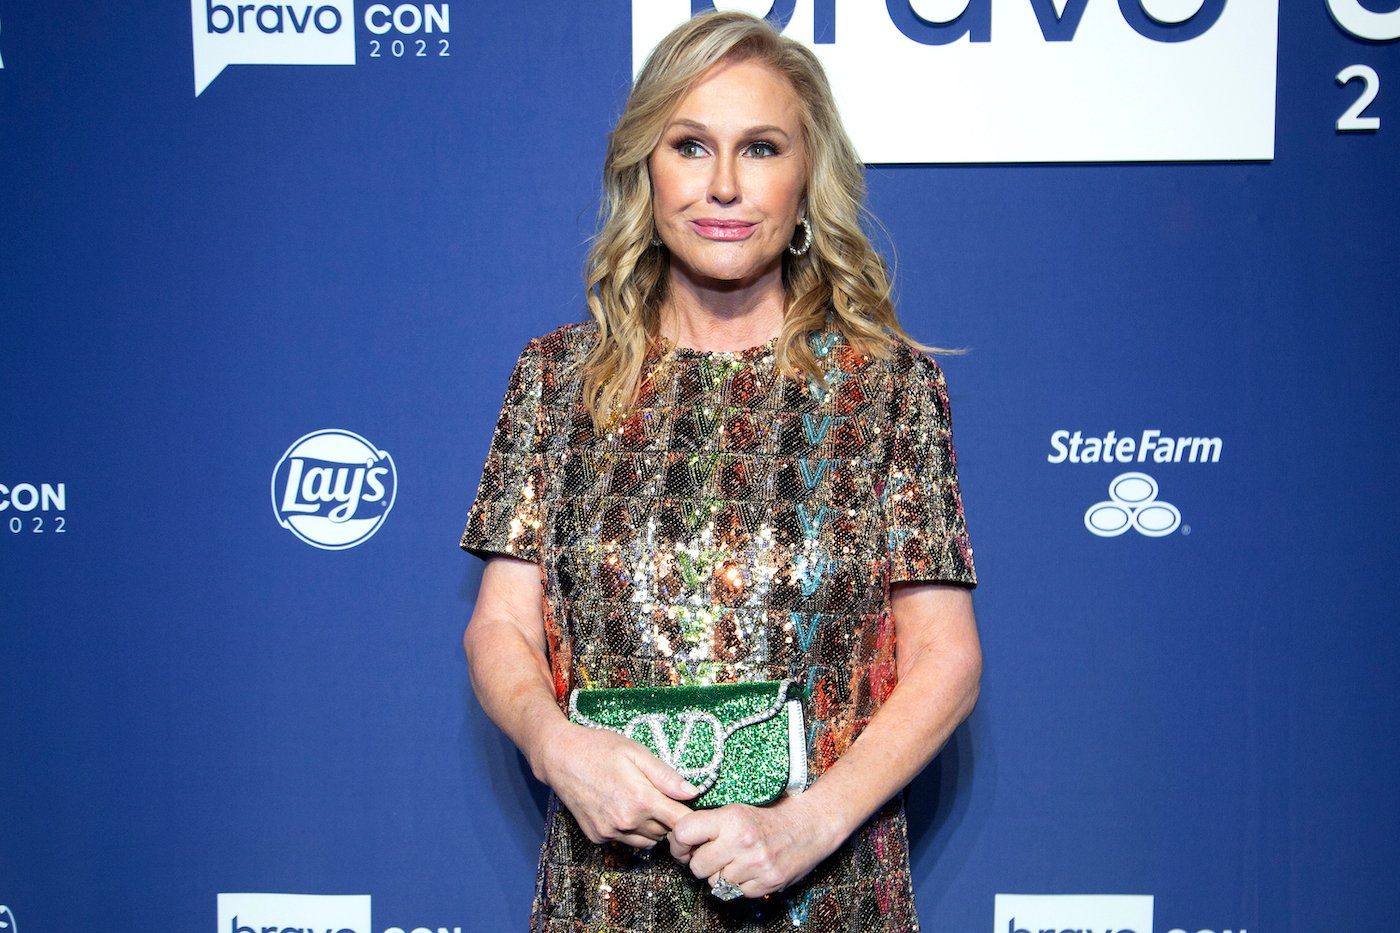 Kathy Hilton from 'RHOBH' attended BravoCon